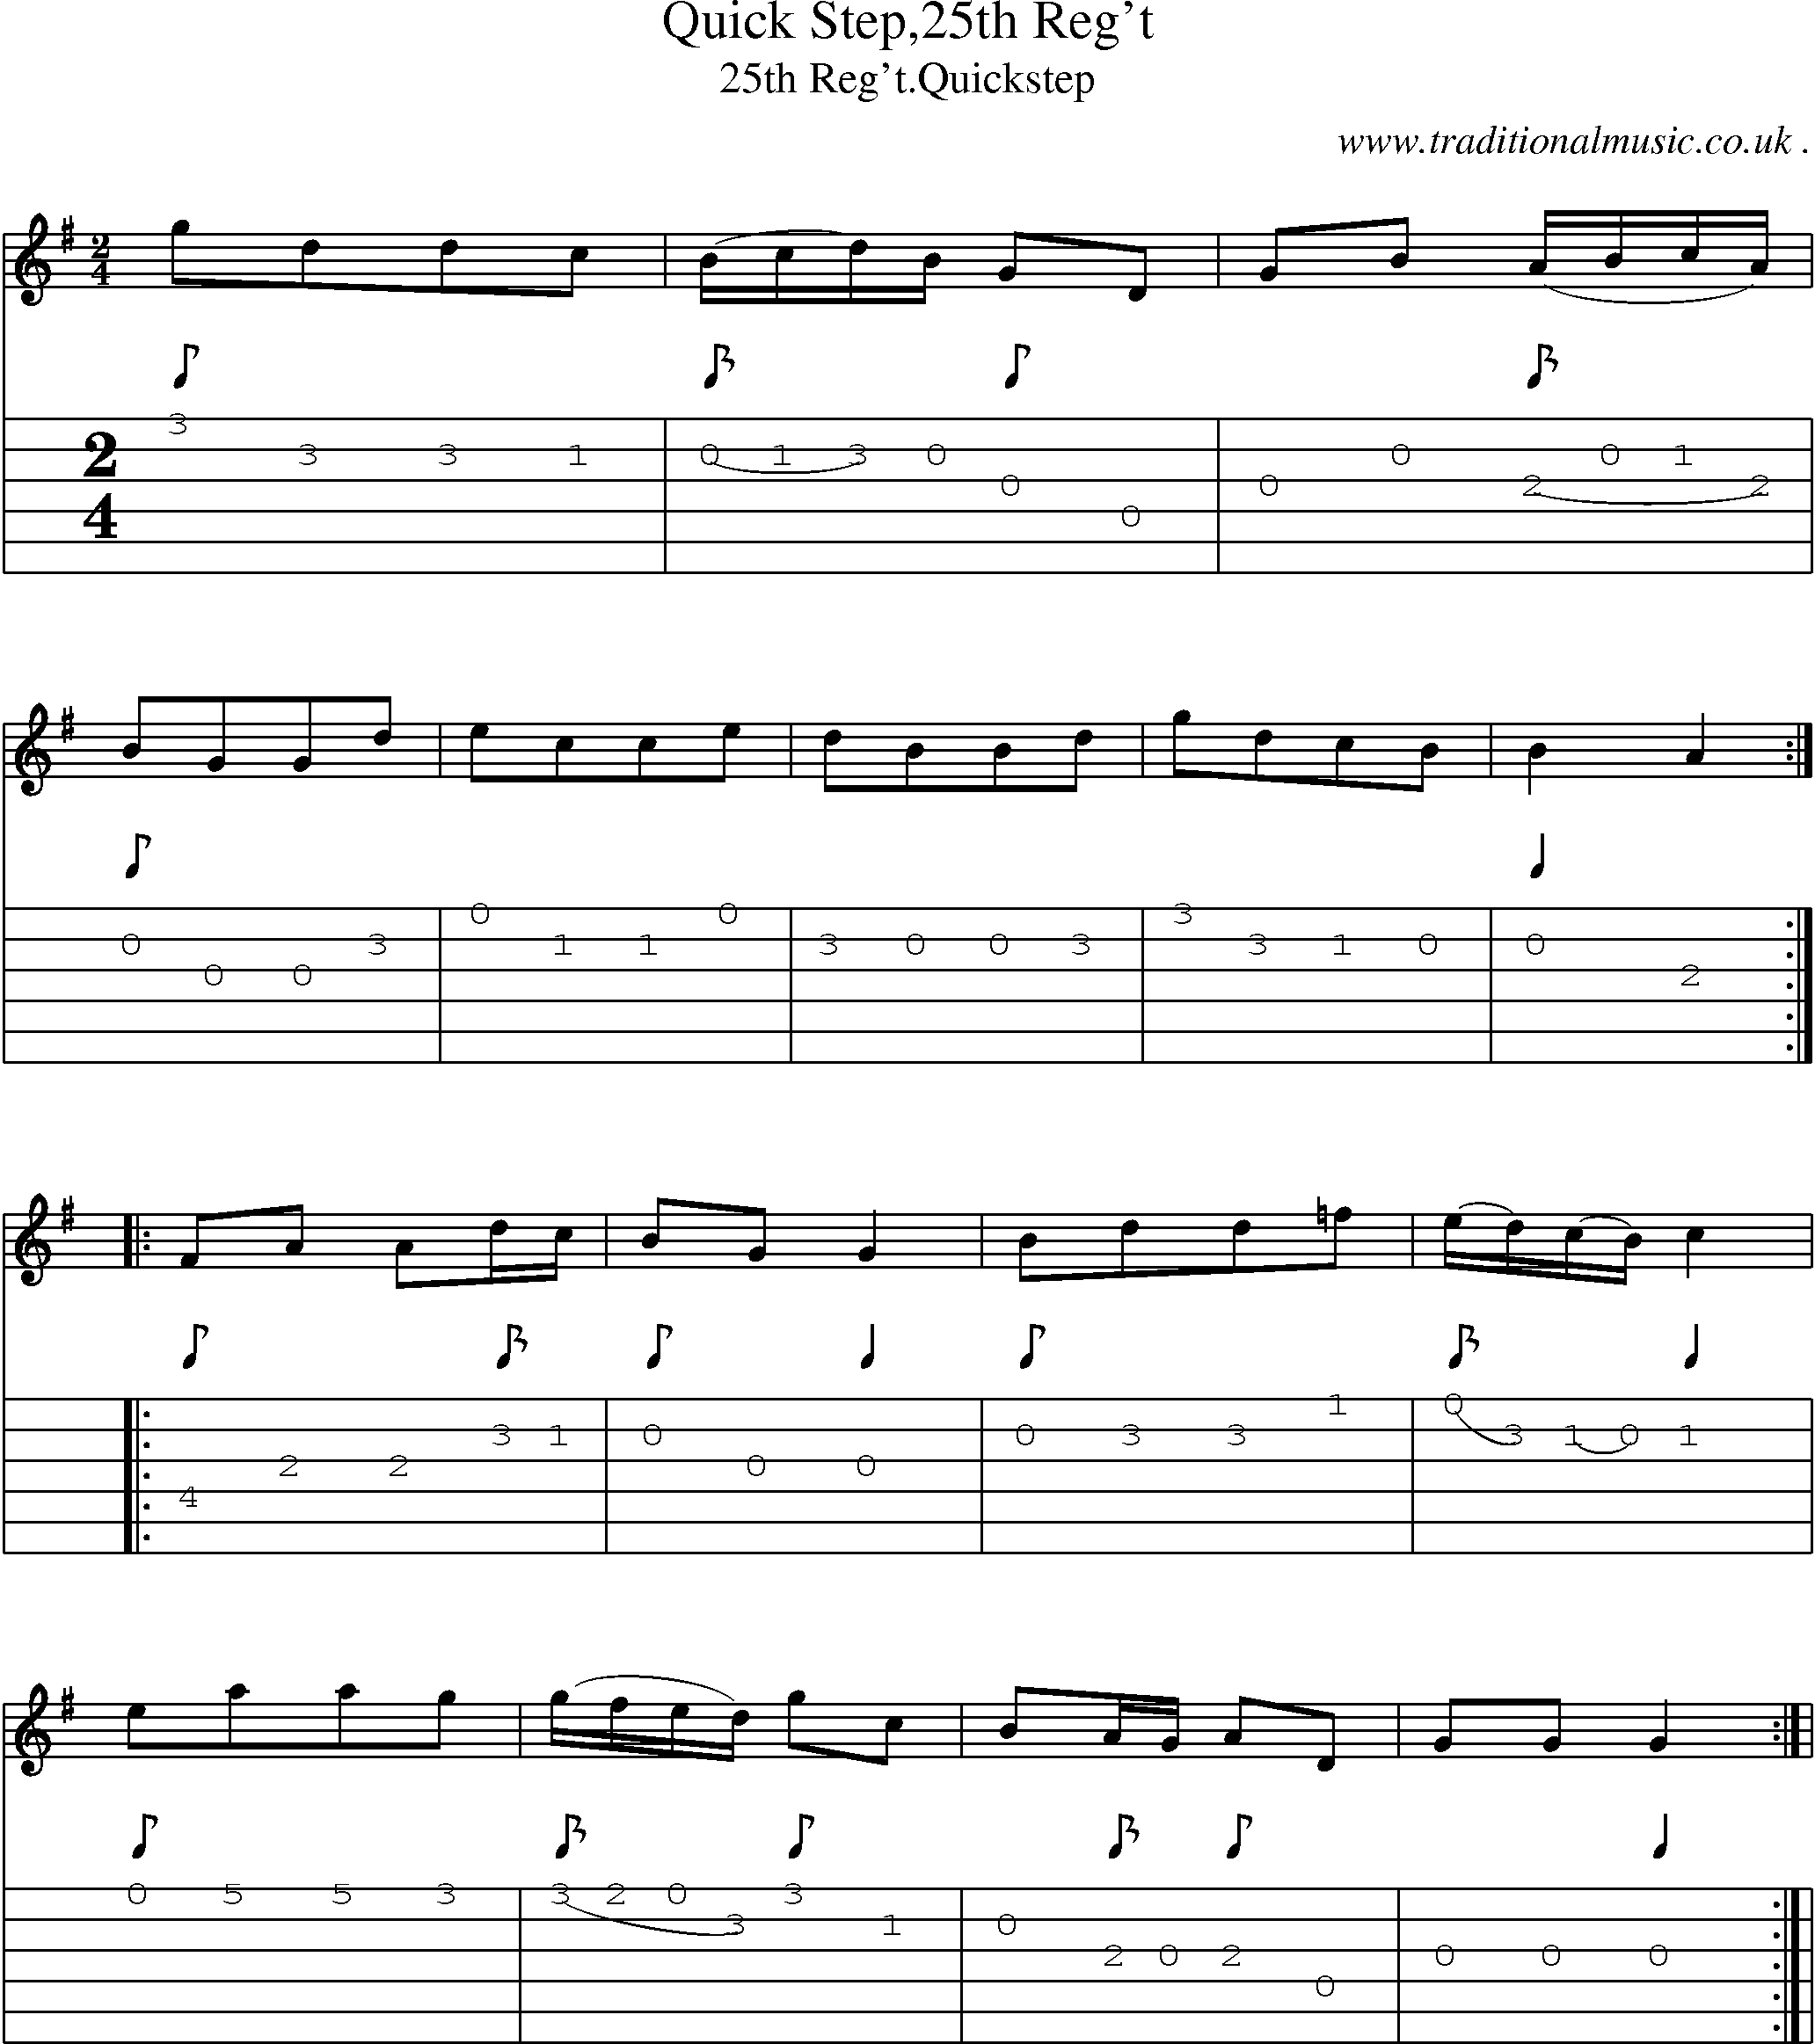 Sheet-Music and Guitar Tabs for Quick Step25th Regt